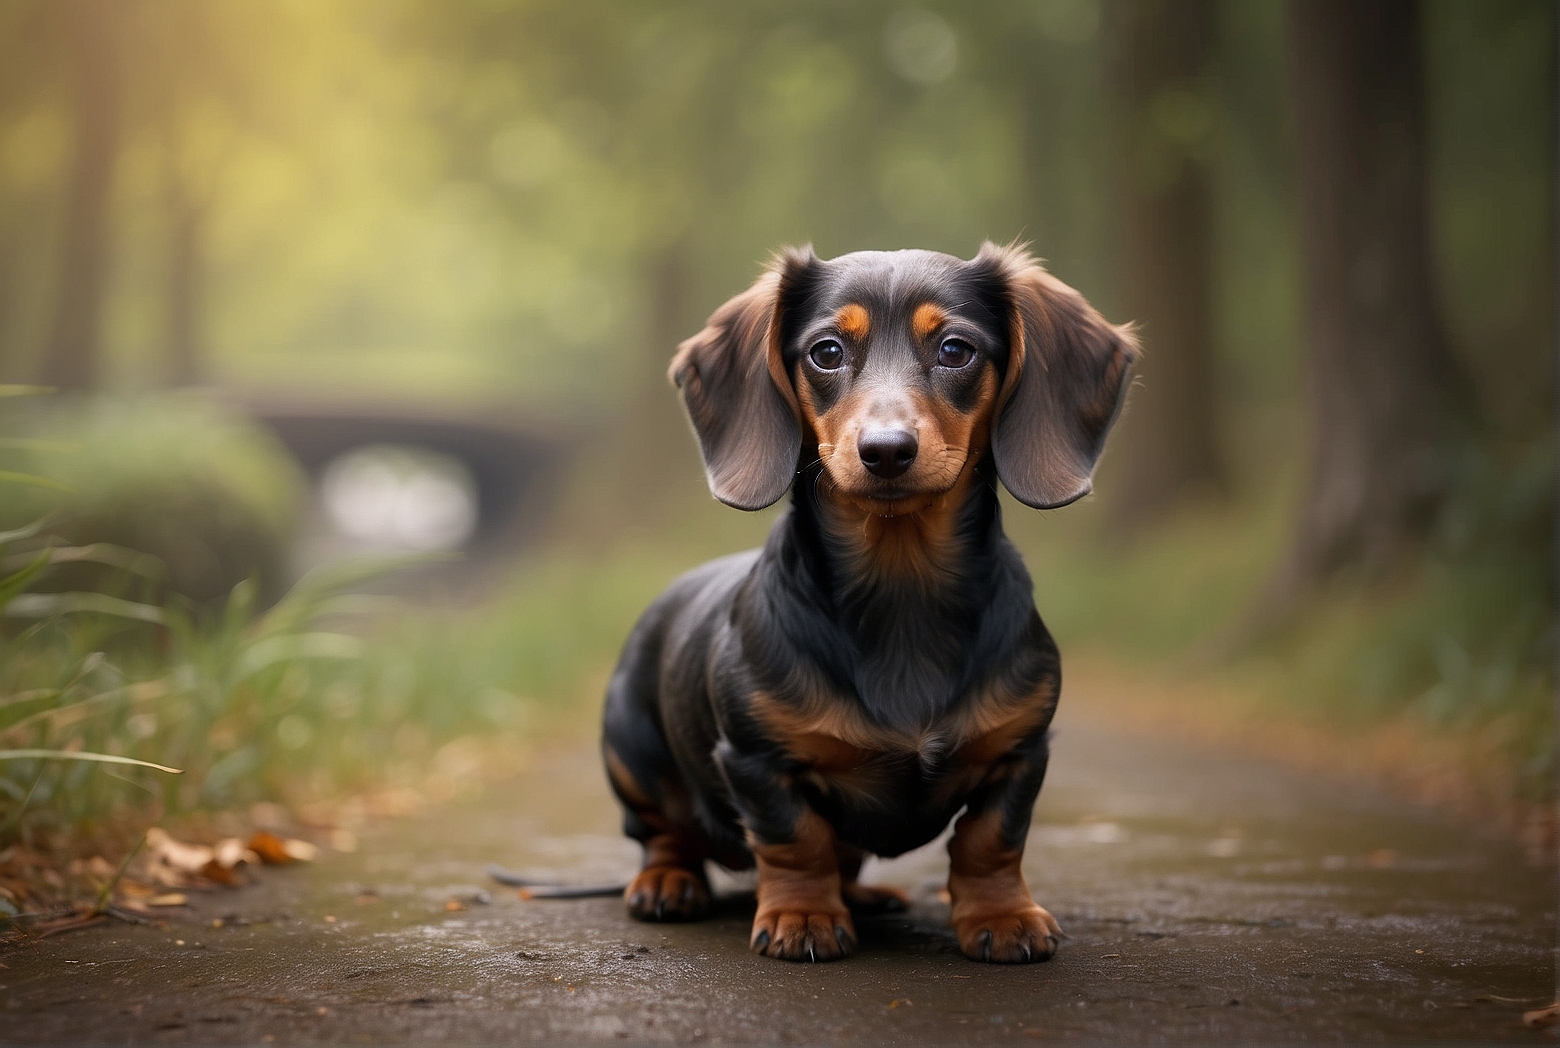 What Are Dachshunds Known For